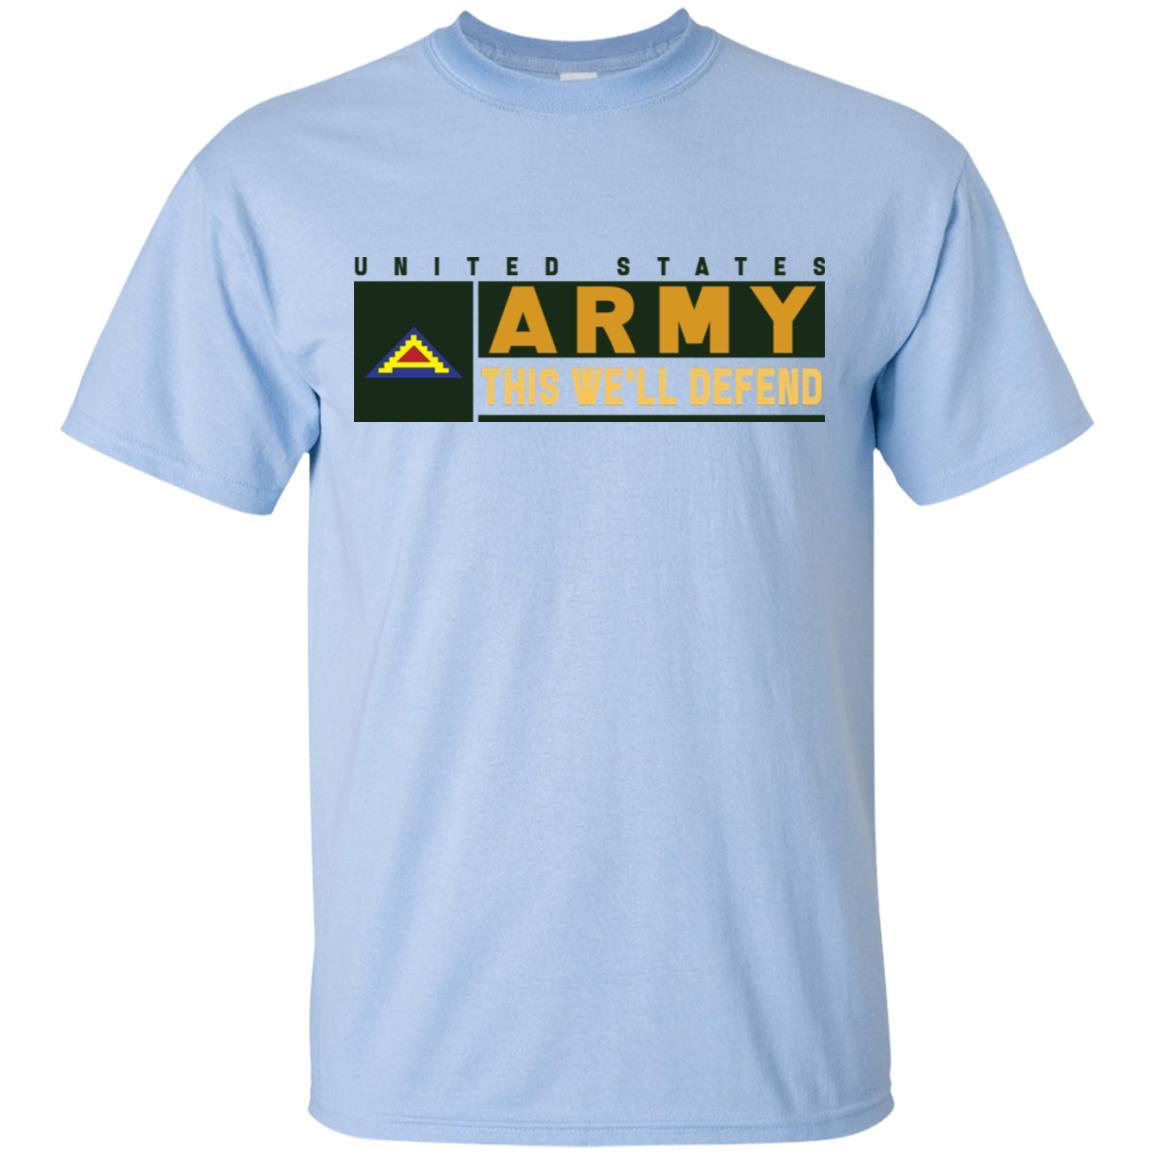 US Army 7TH ARMY- This We'll Defend T-Shirt On Front For Men-TShirt-Army-Veterans Nation